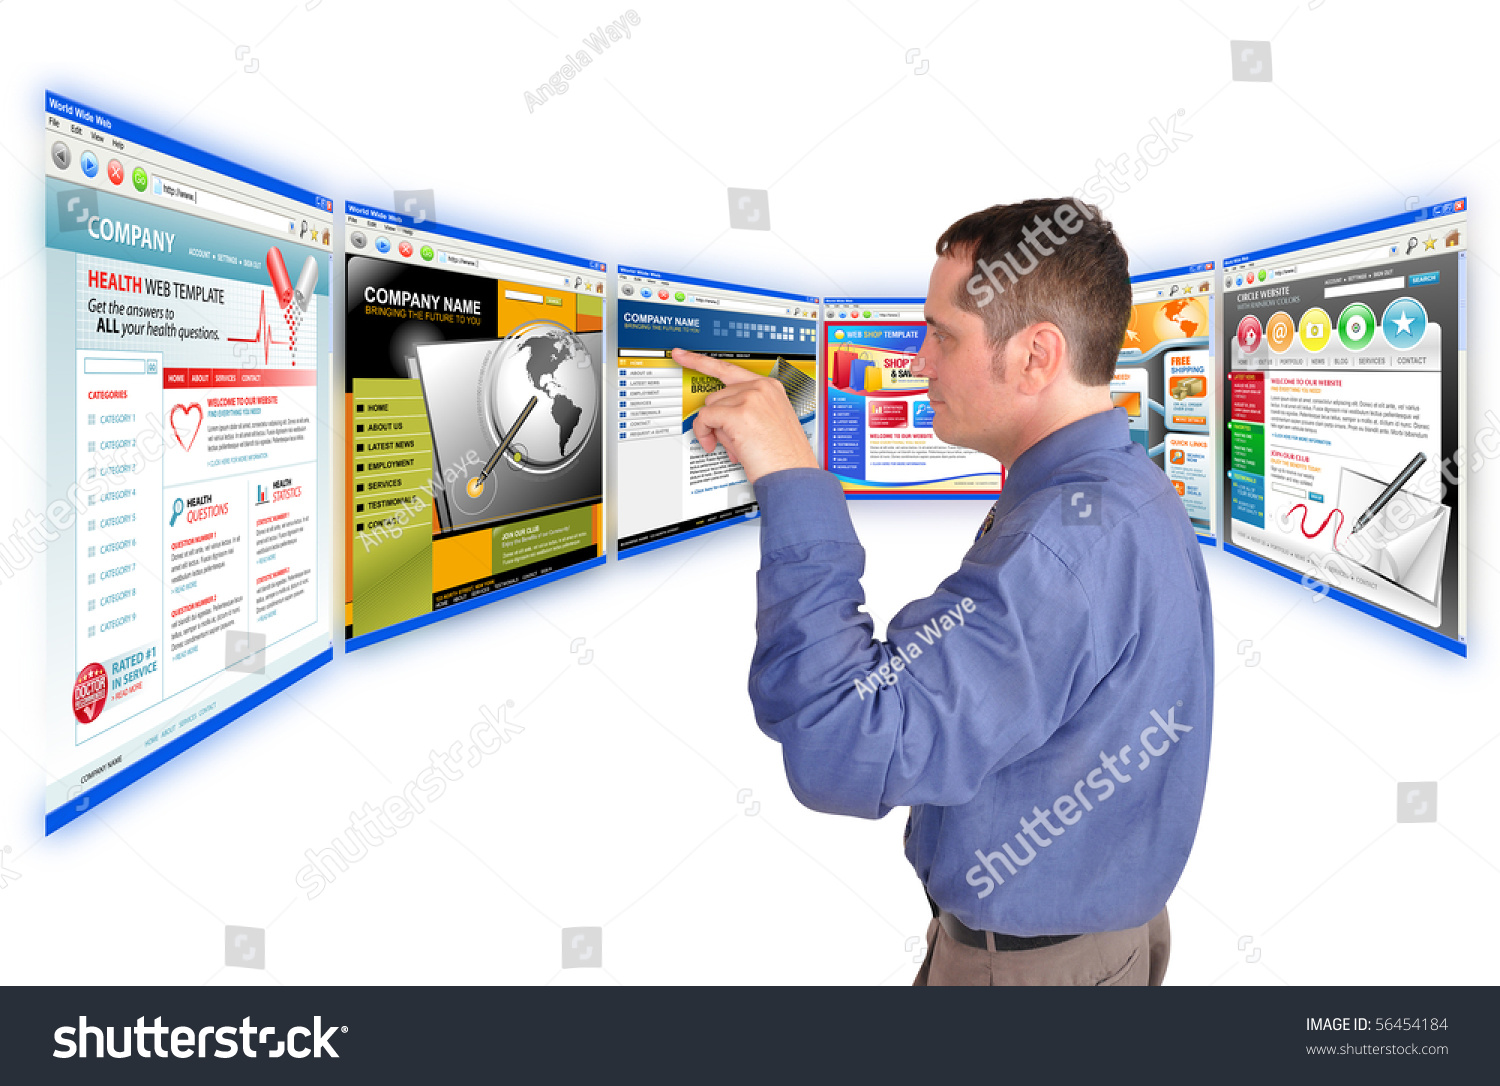 A business man is searching and pointing at an internet website and there are many web choices. He is on a white background. Use it for a communication, commerce or a research concept. #56454184